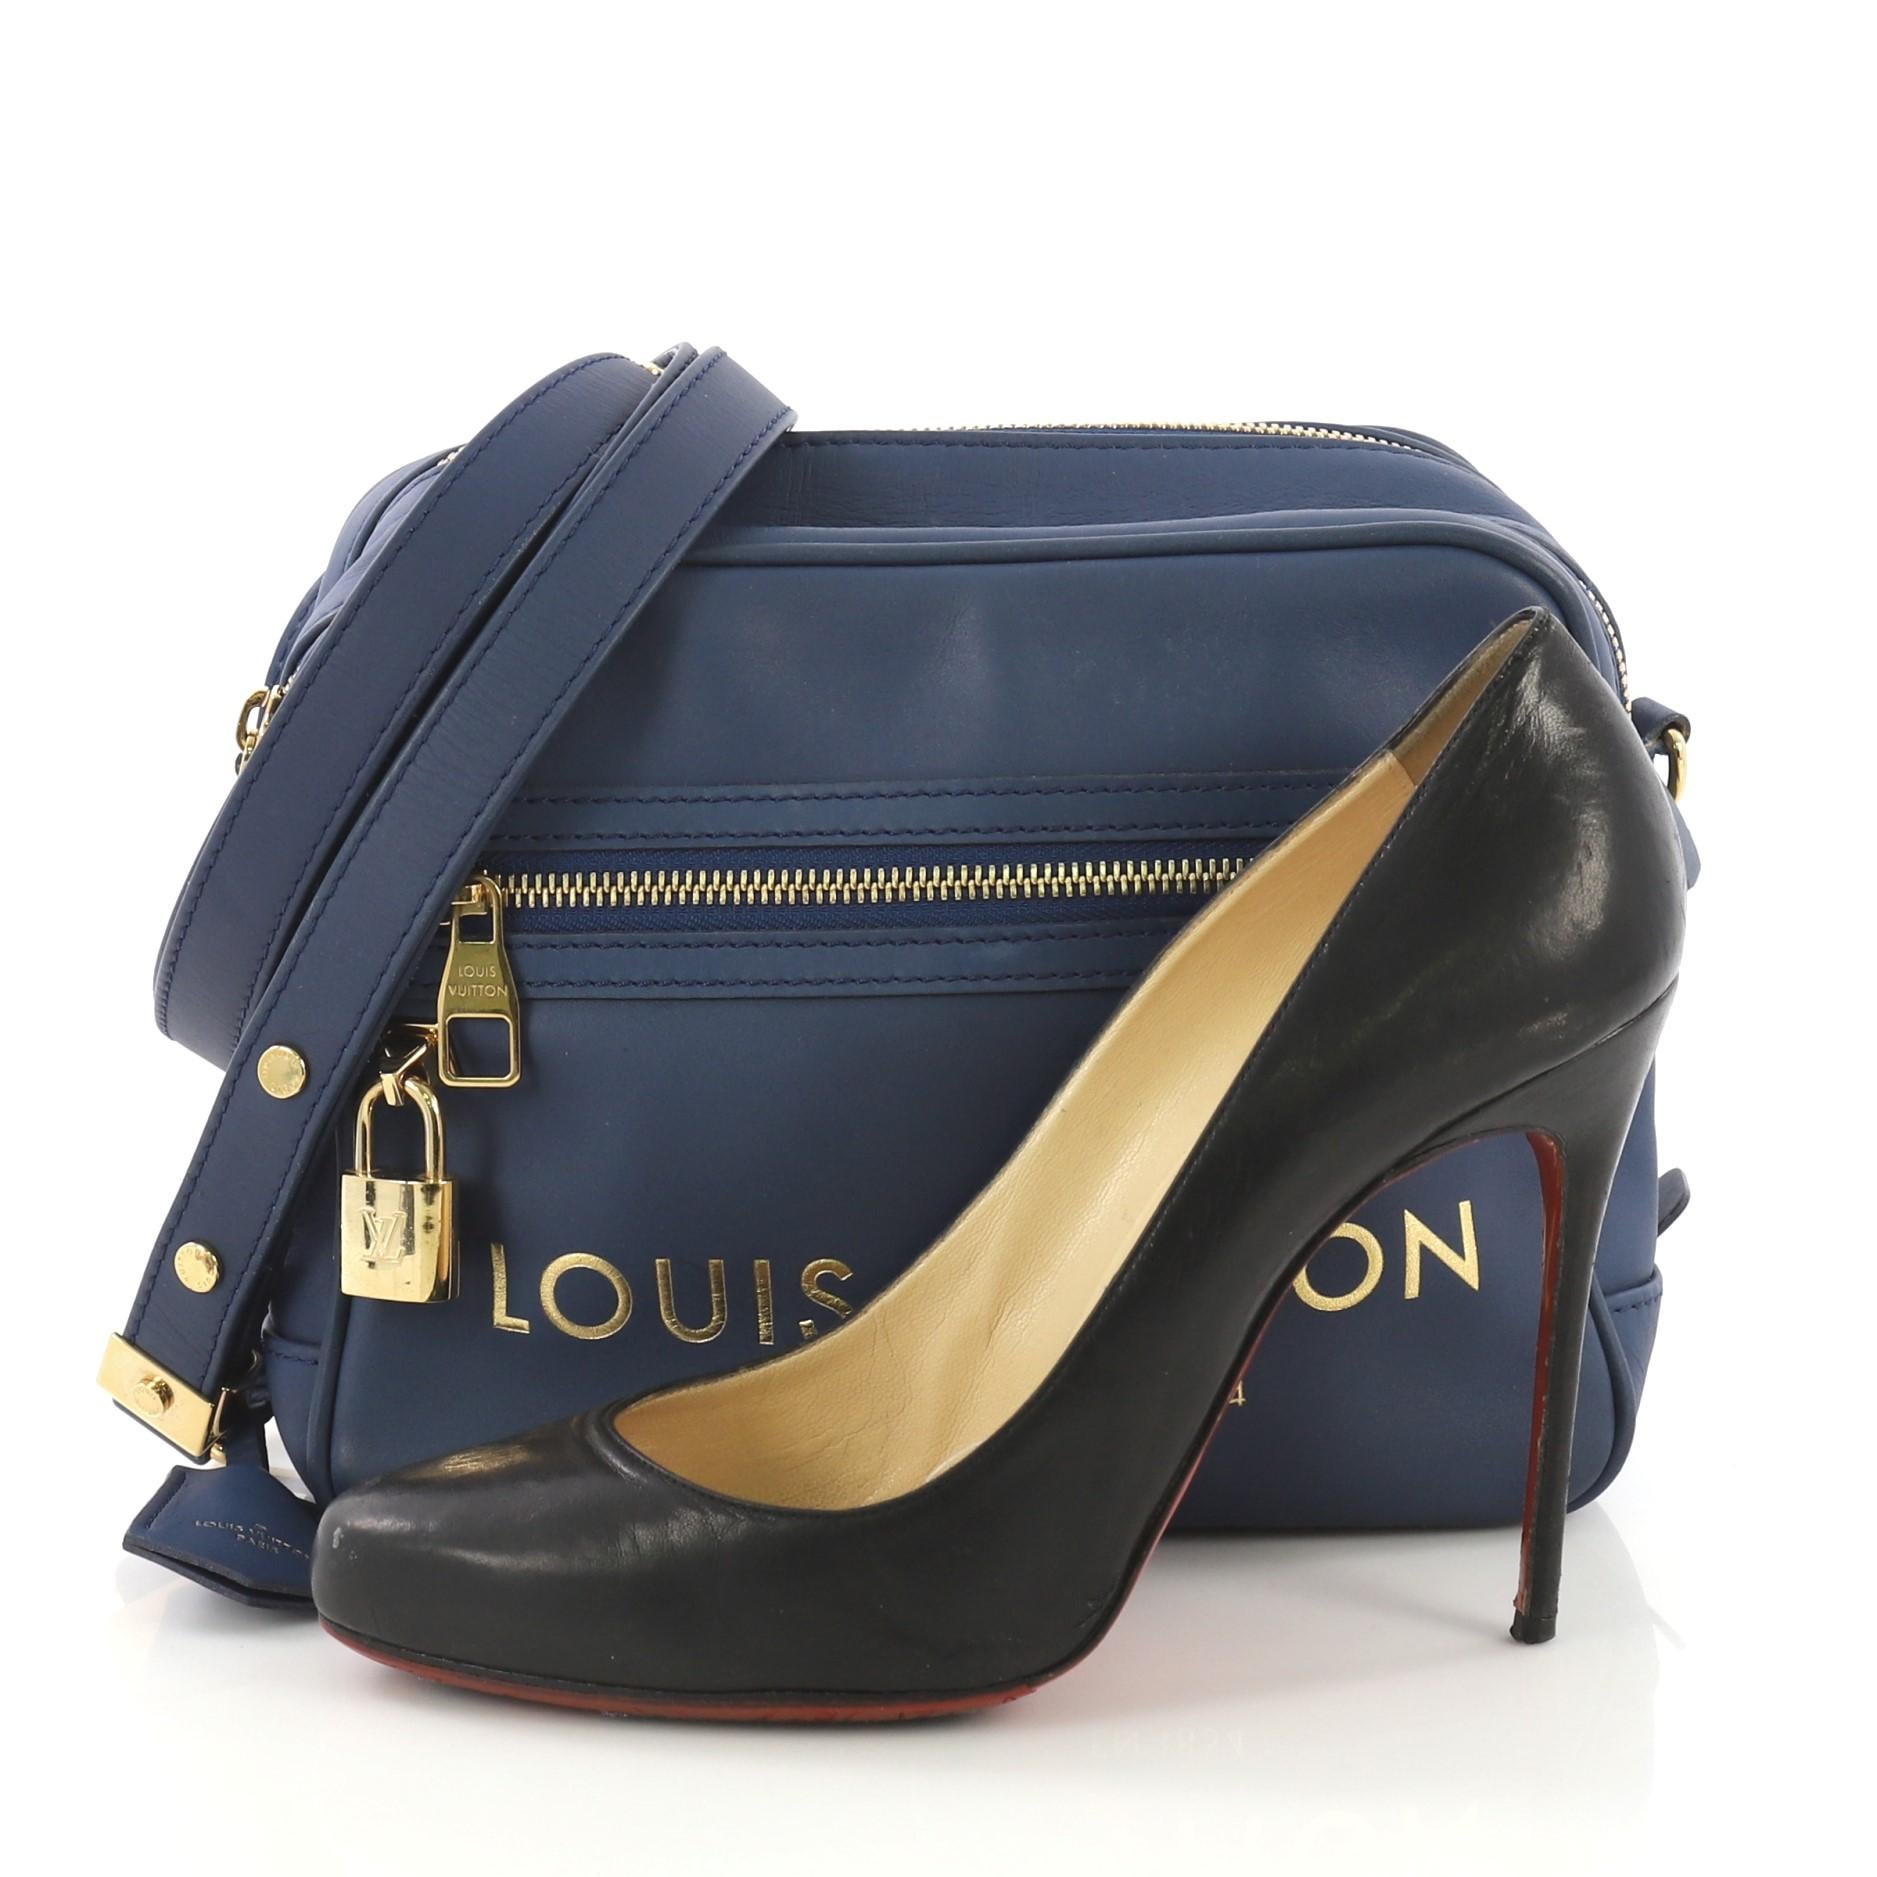 This Louis Vuitton Flight Paname Takeoff Bag Leather, crafted in blue leather, features flat adjustable shoulder strap, exterior front zip pocket and back slip pocket, dual zip compartments, and gold-tone hardware. Its zip closure opens to a beige